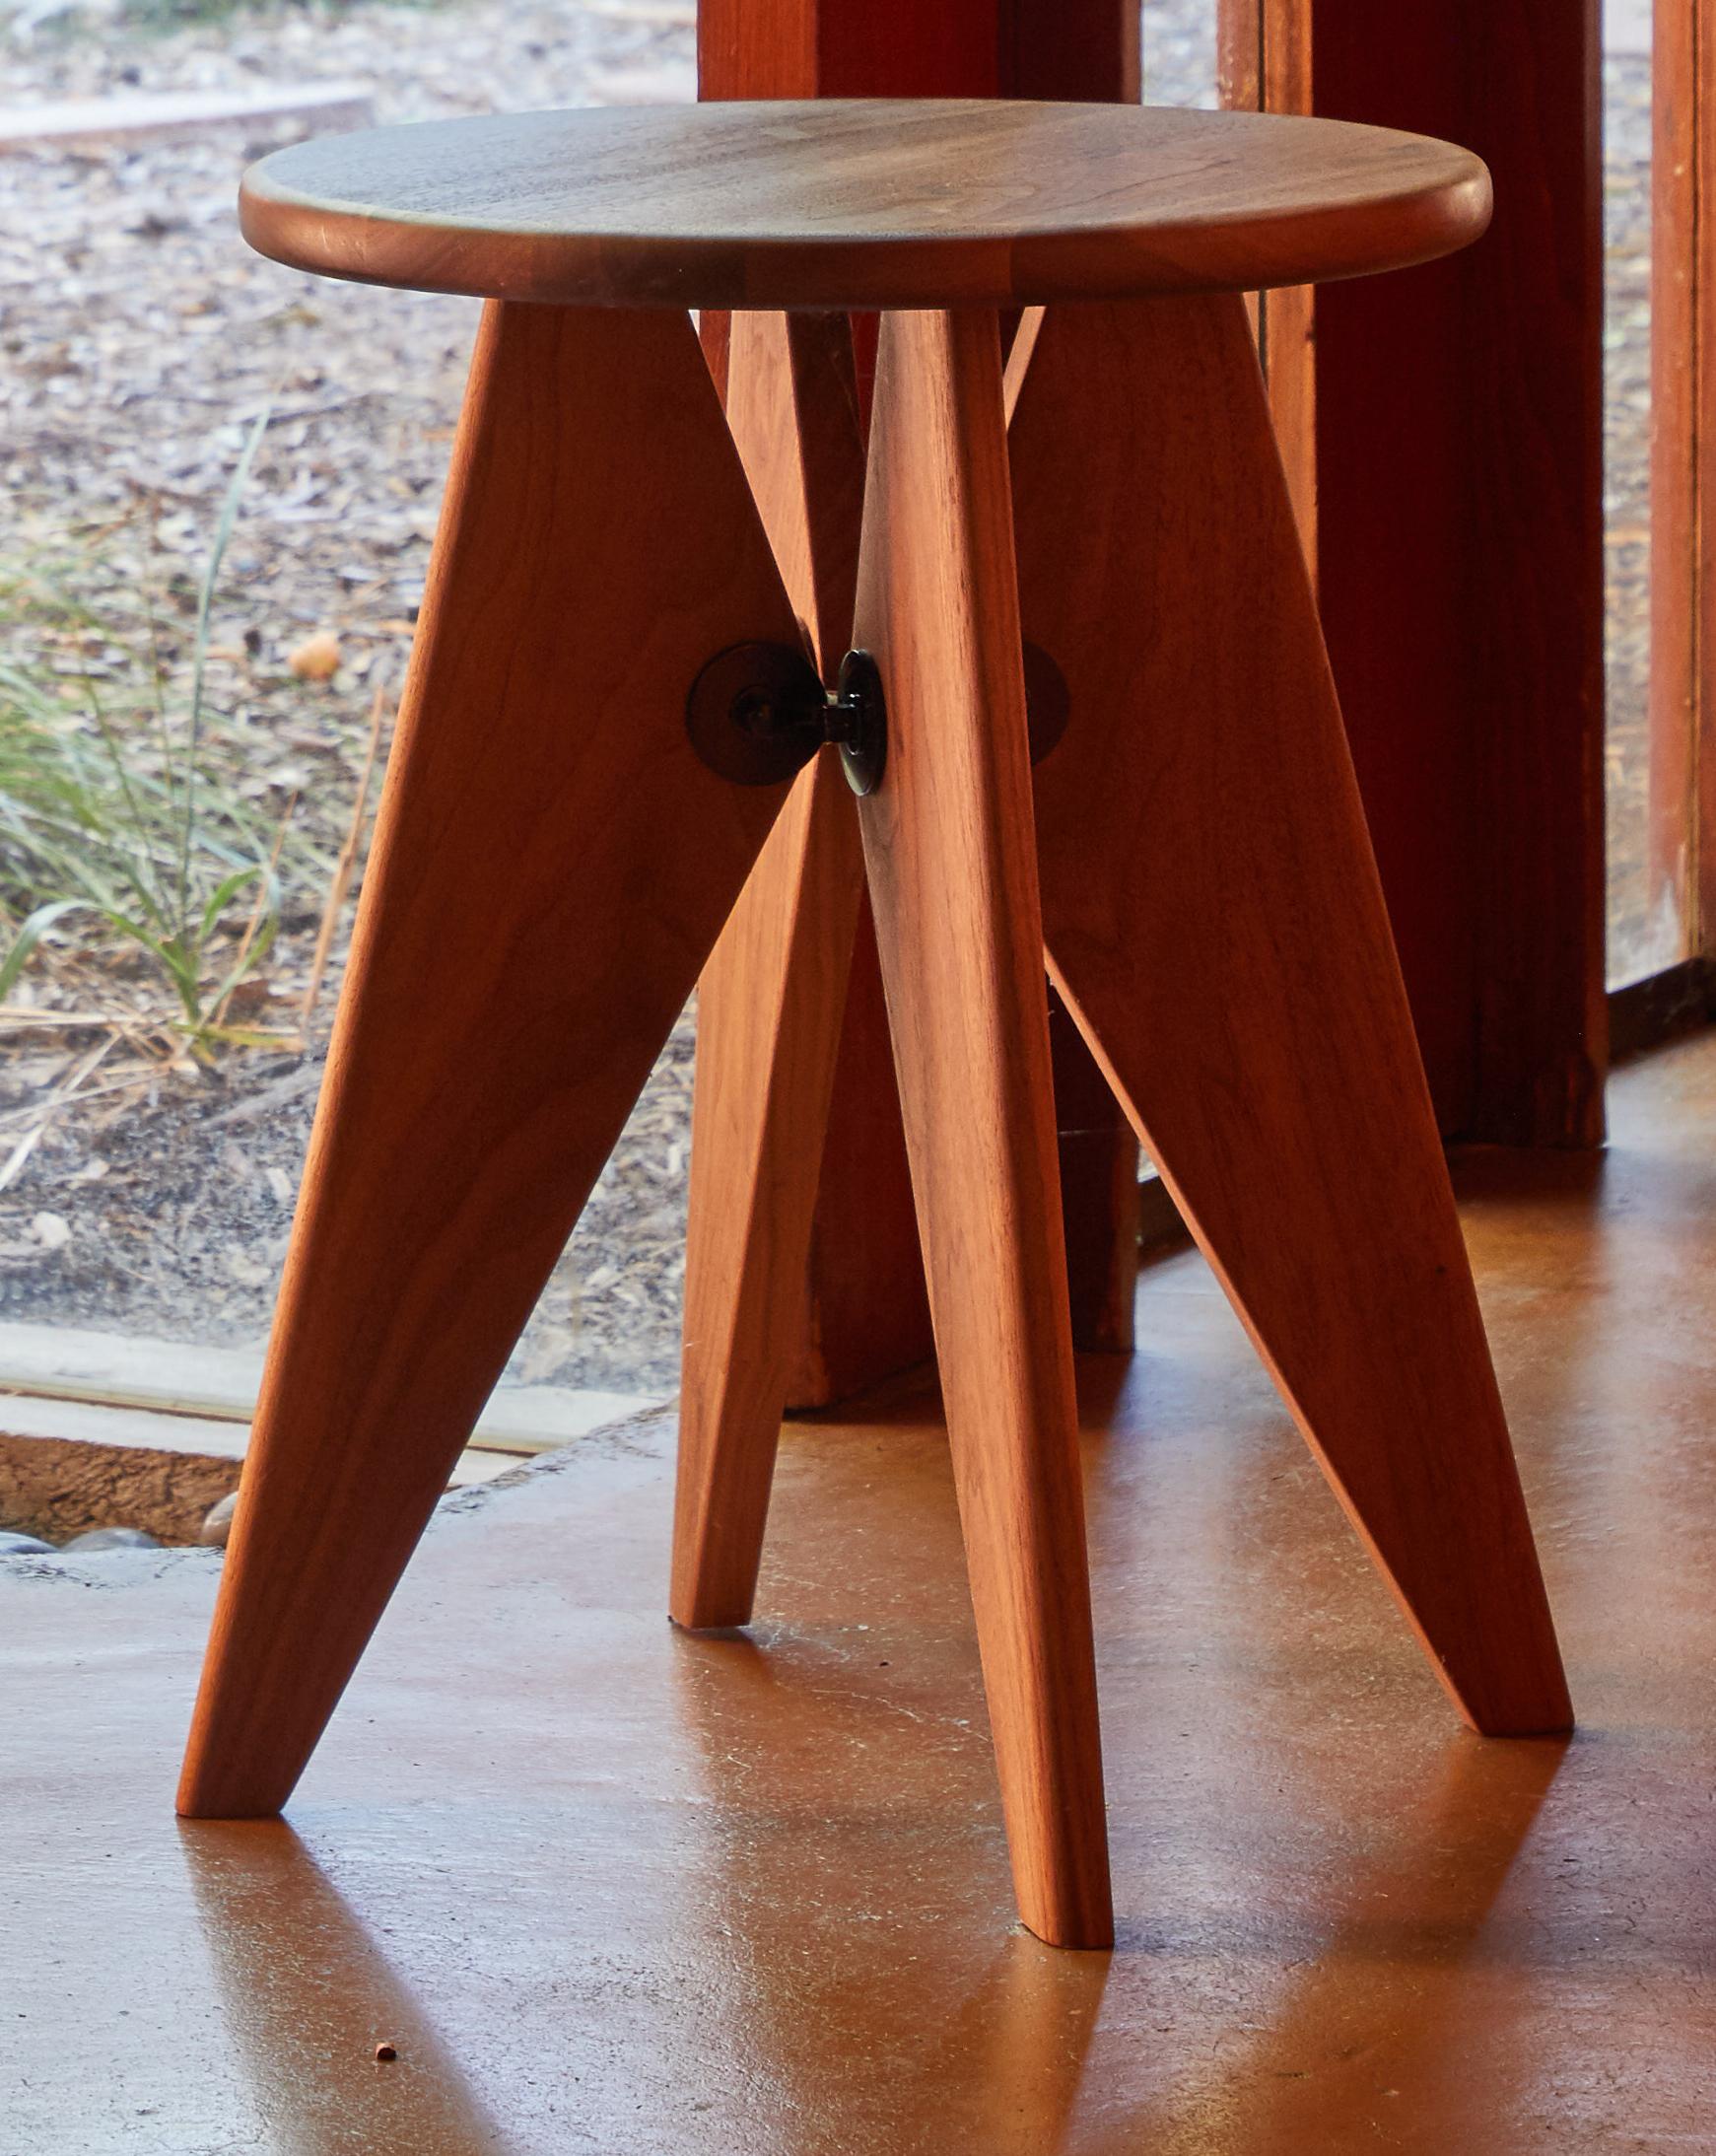 Swiss Jean Prouvé Tabouret Solvay Stools in American Walnut For Sale